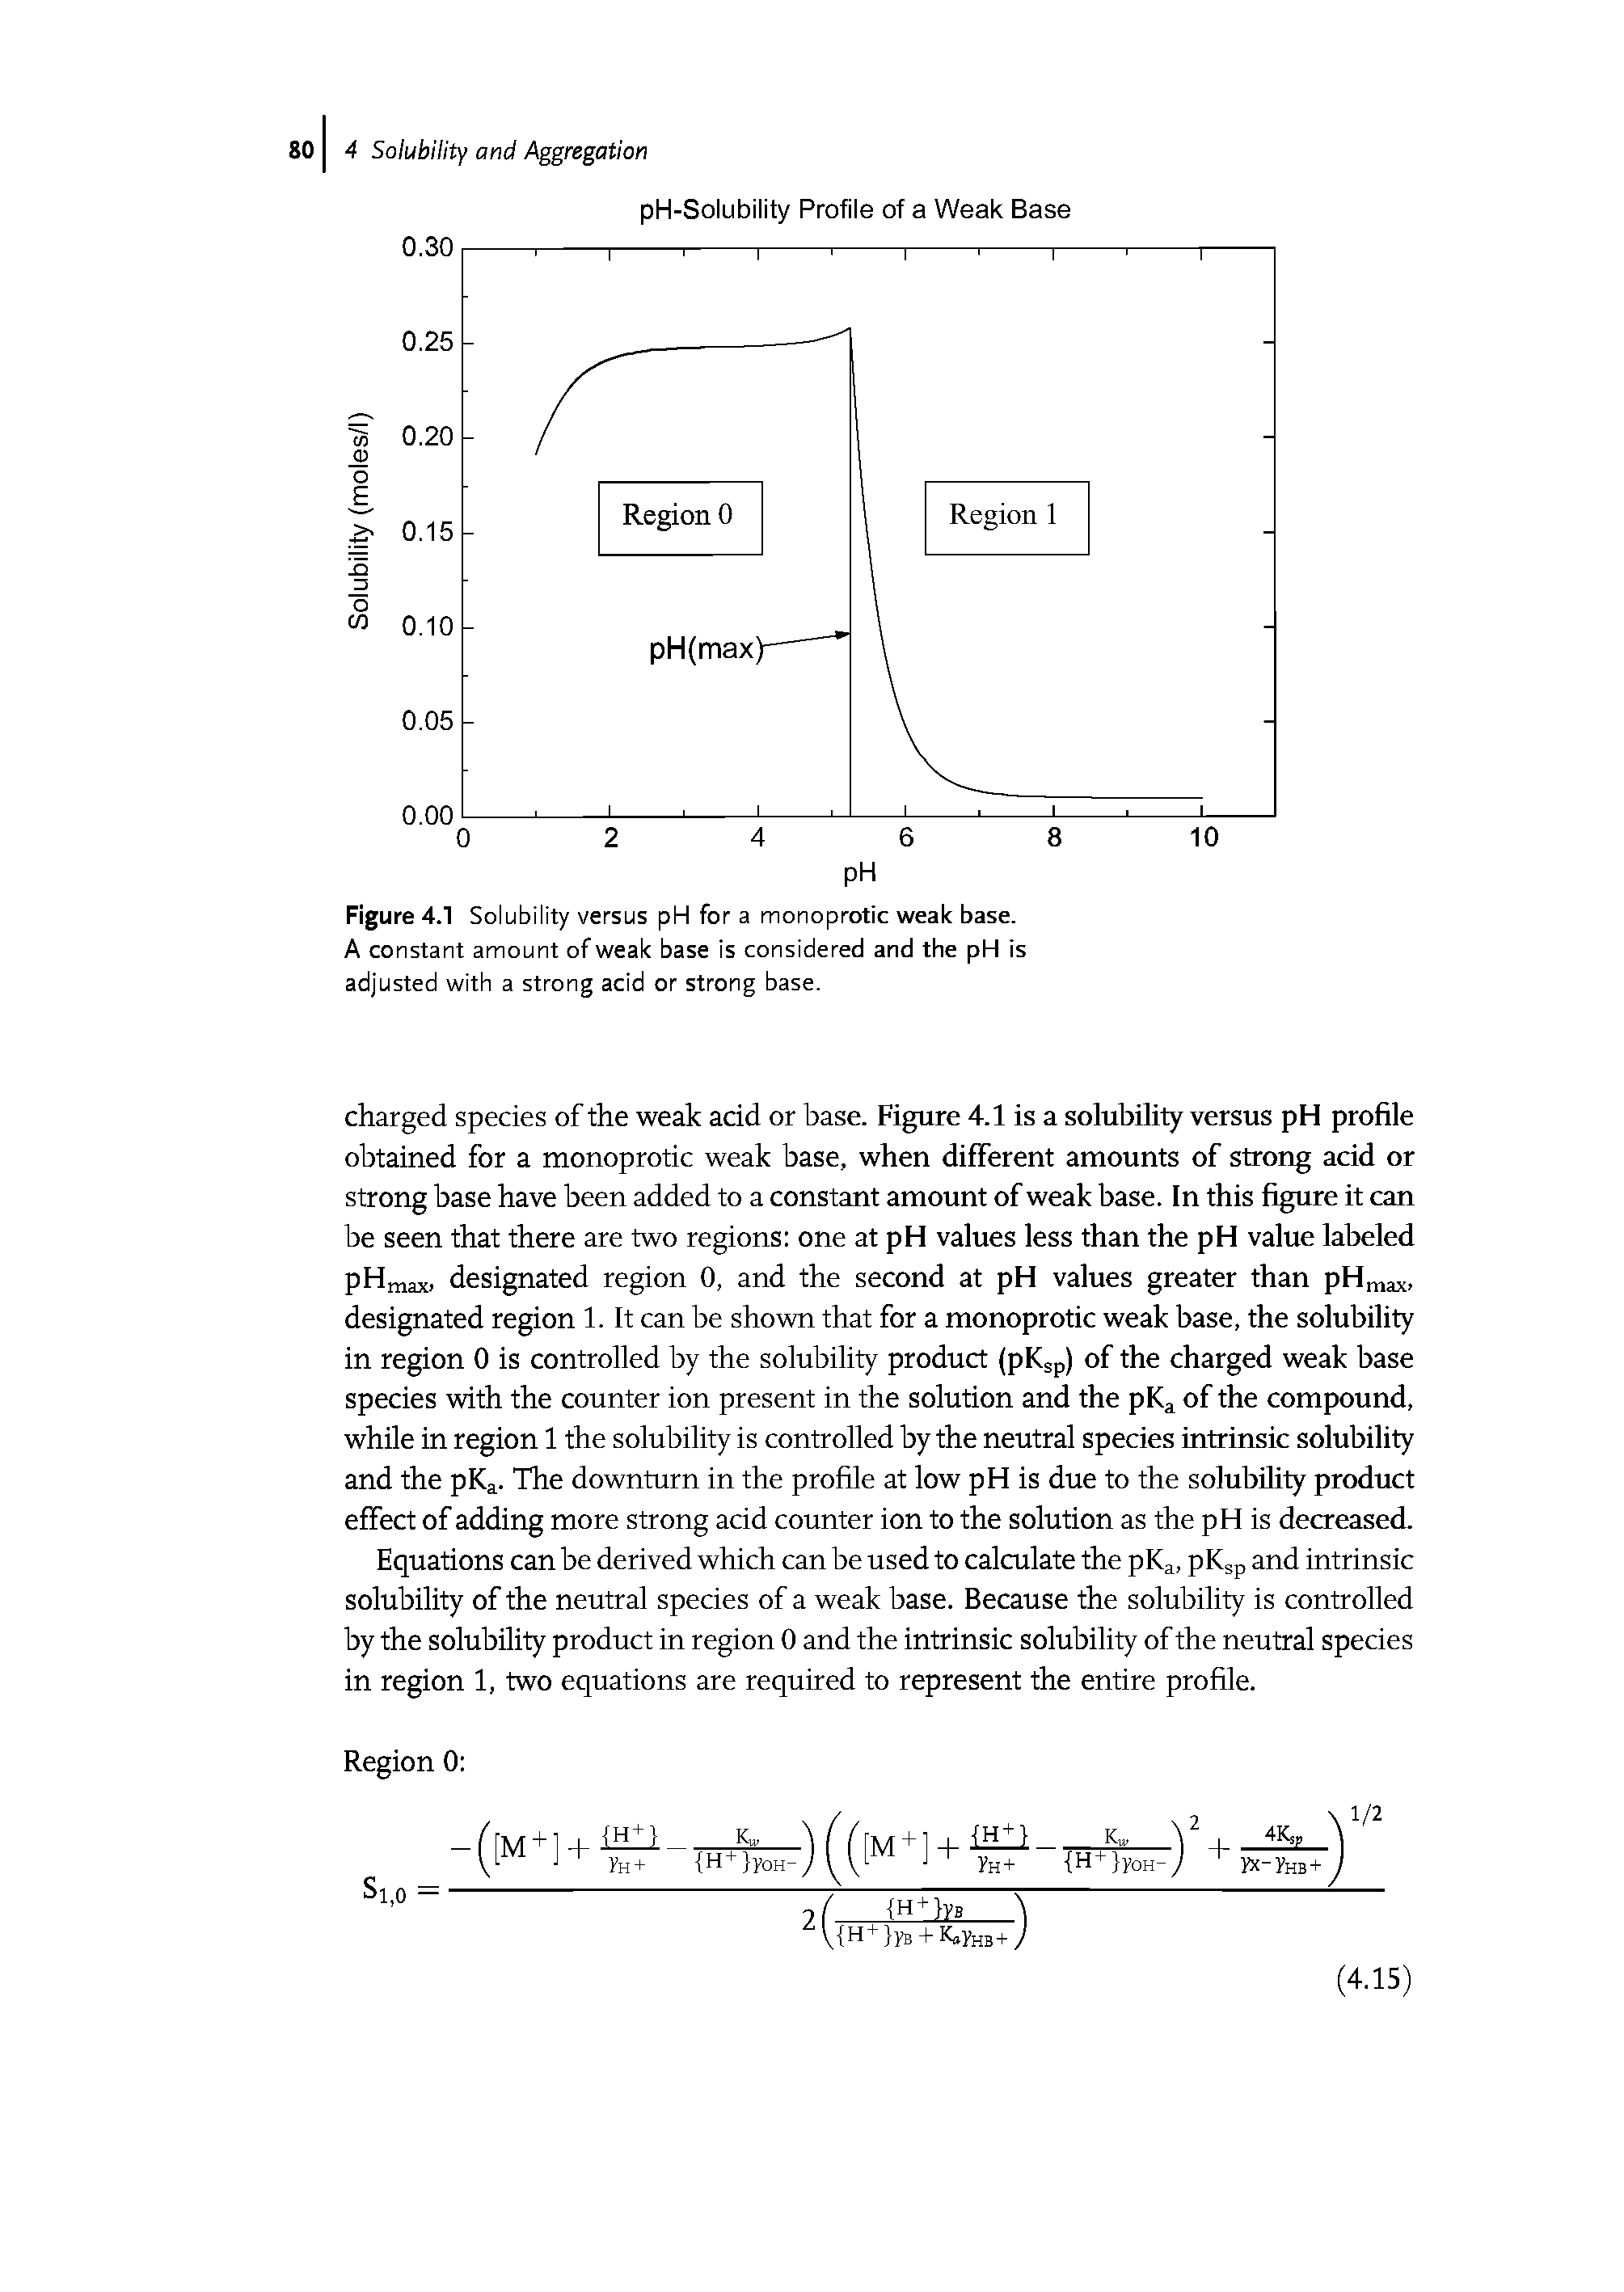 Figure 4.1 Solubility versus pH for a monoprotic weak base. A constant amount of weak base is considered and the pH is adjusted with a strong acid or strong base.